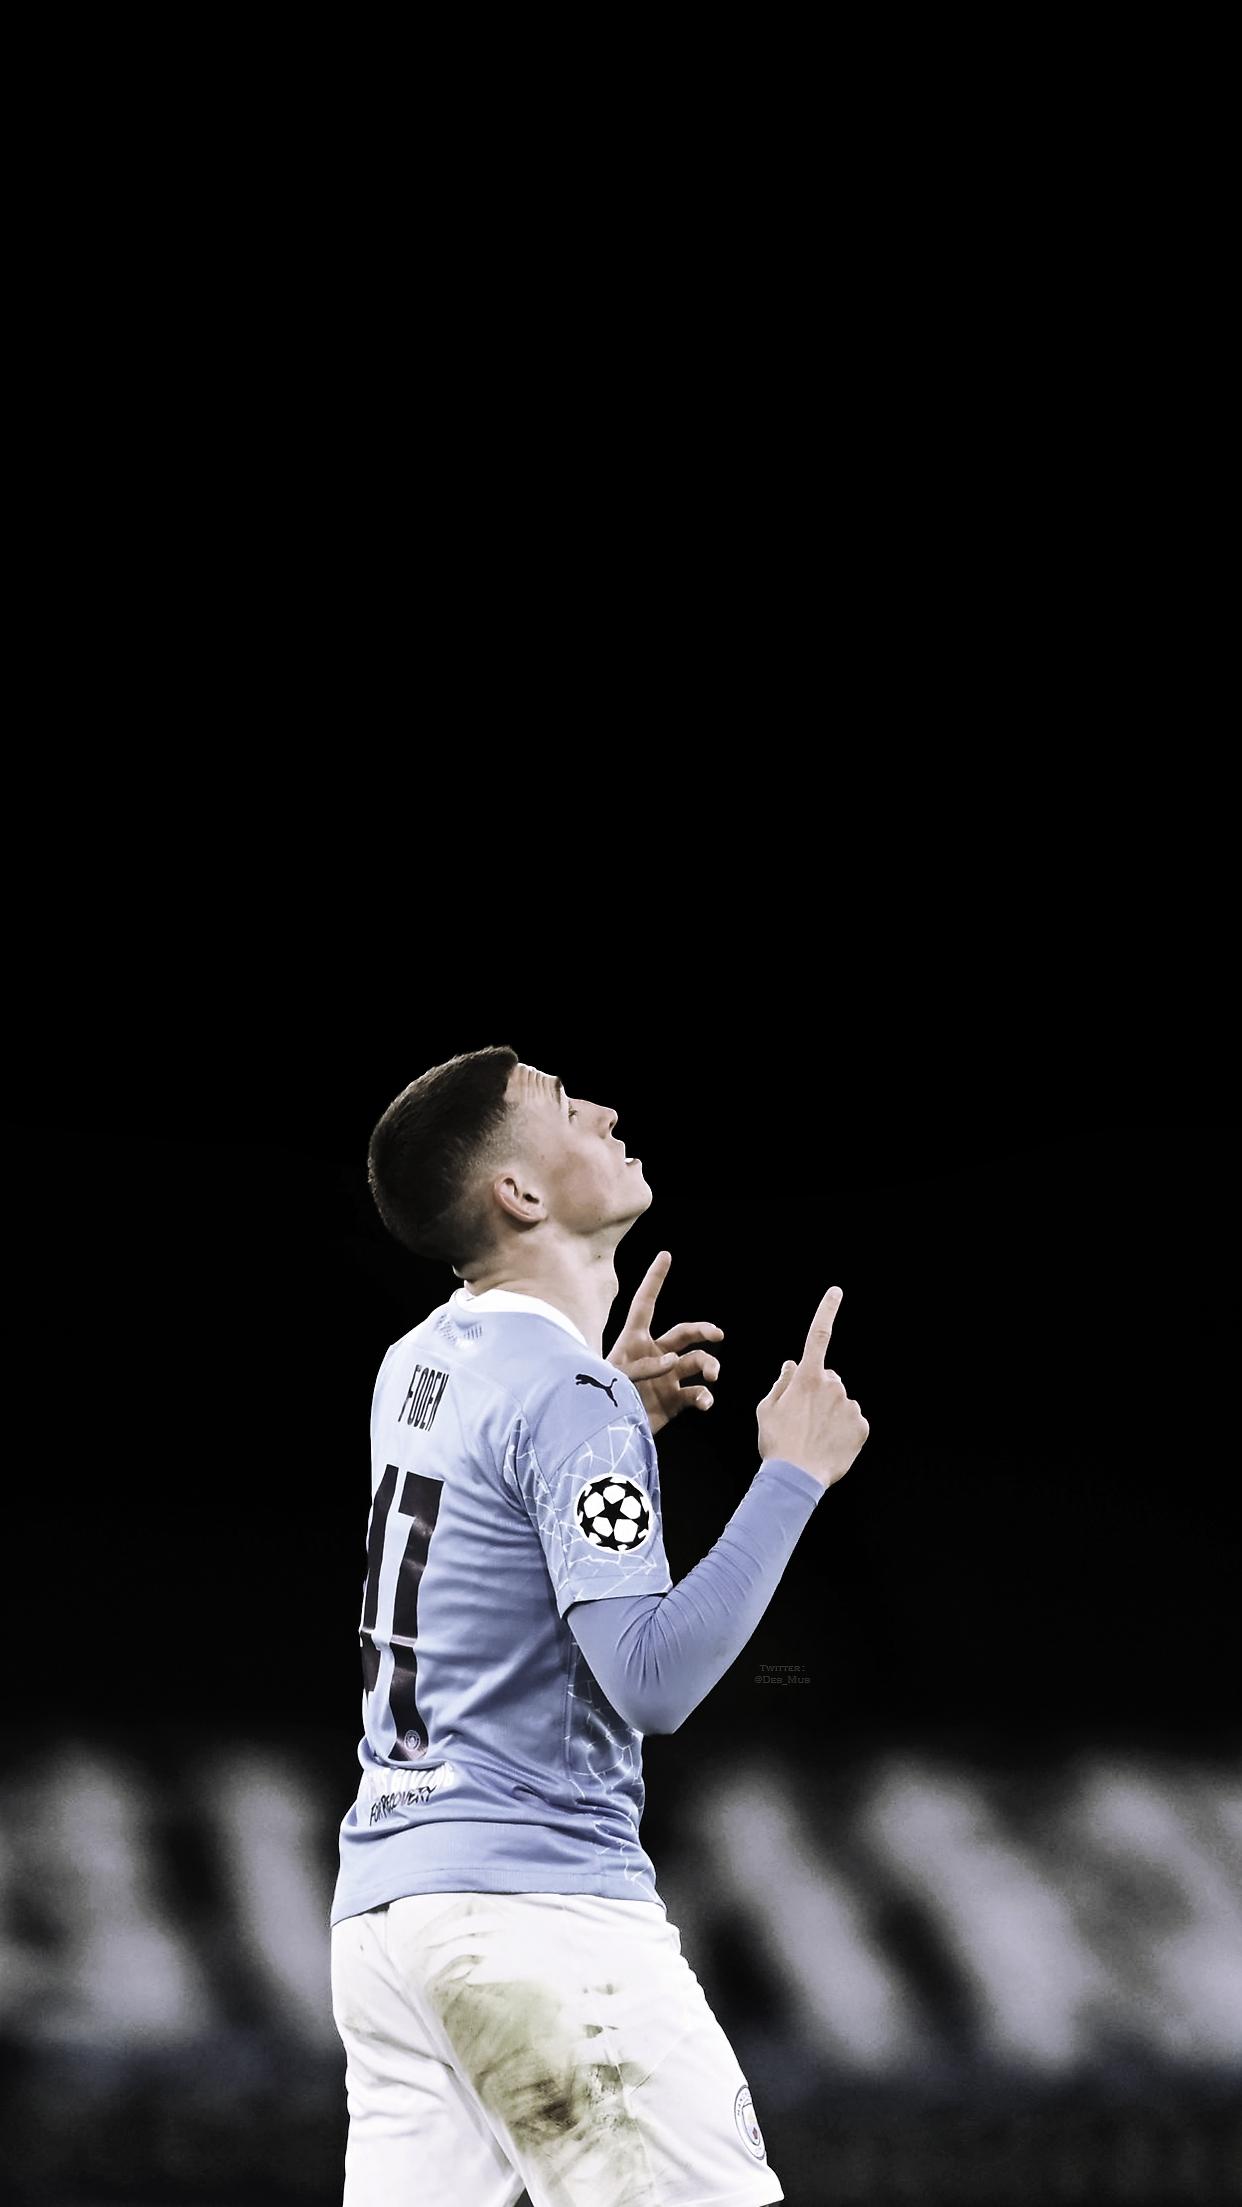 DesMus on 4K Wallpapers l Phil Foden Phil foden https